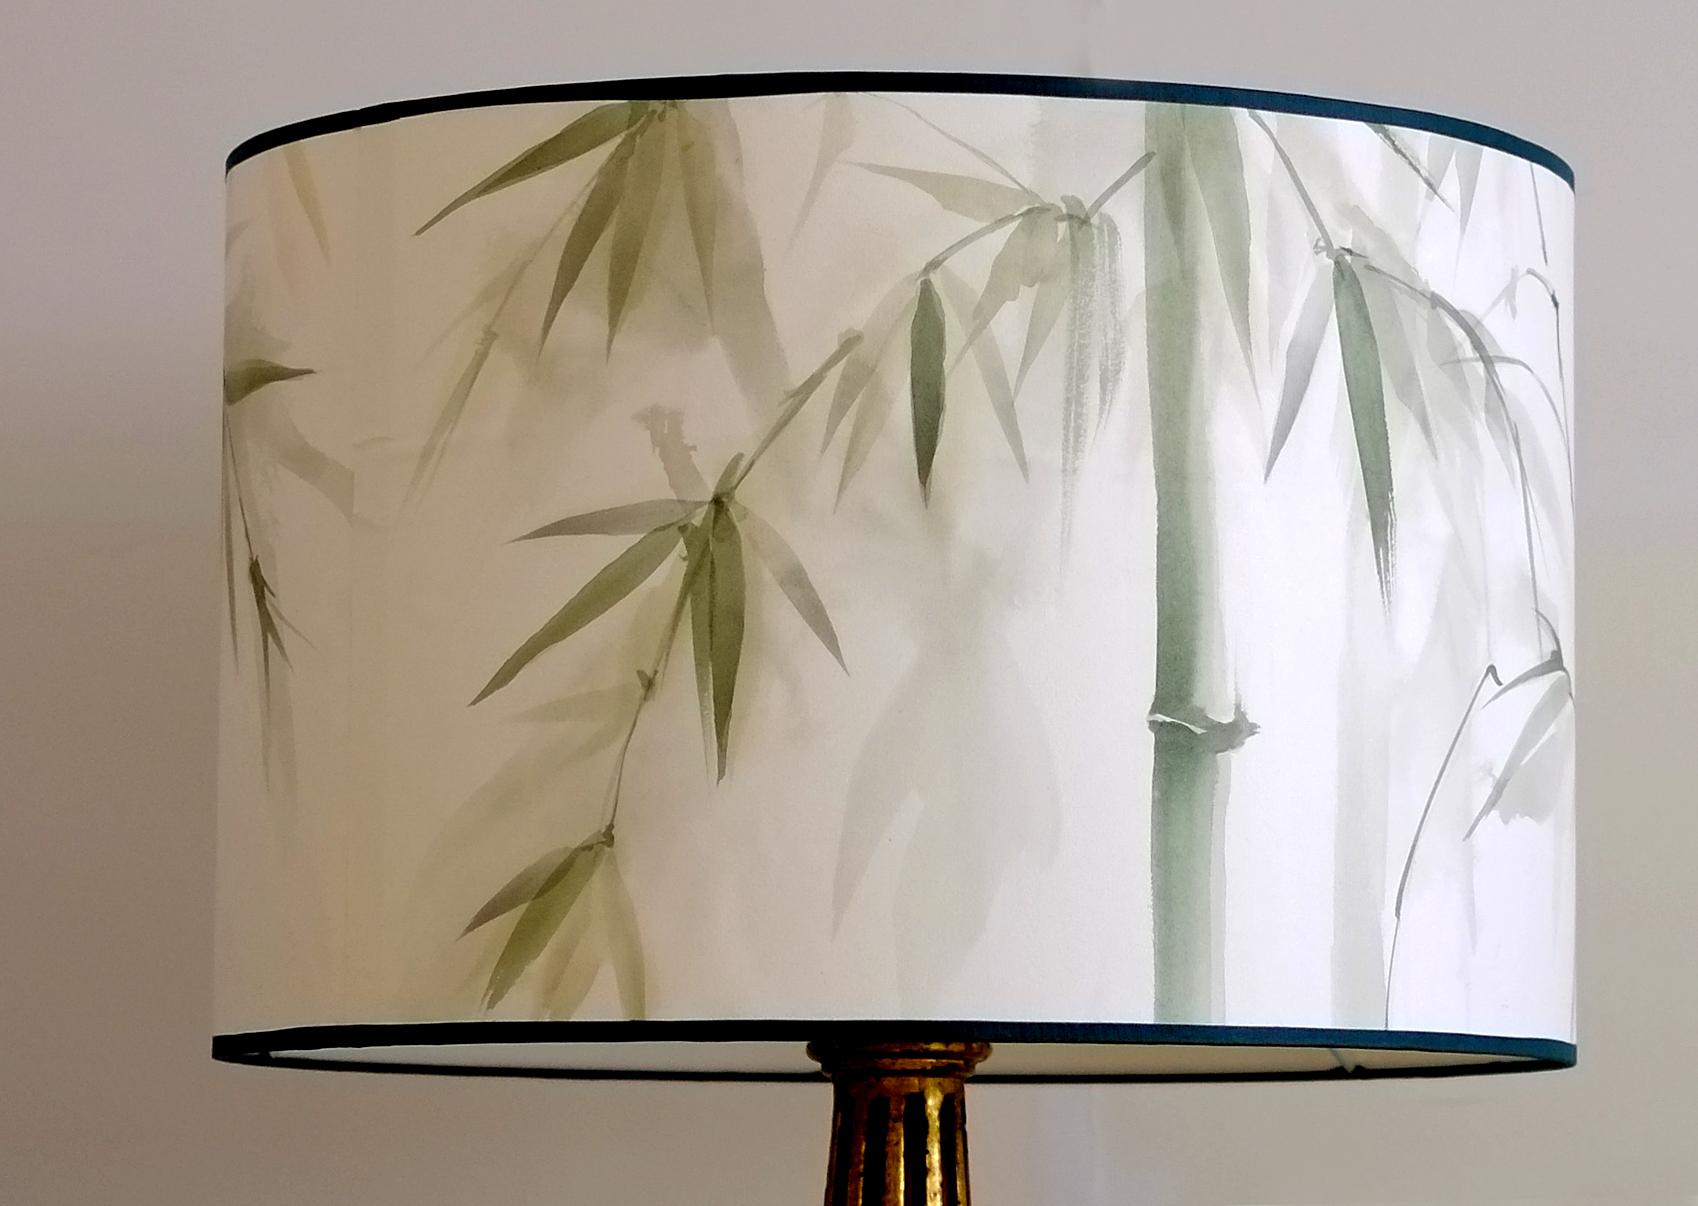 Welcome to our lampshade Company
In BuenaVentura we produce hand-painted wallpaper. We combine sophisticated processes of handcrafted creation in order to capture the fleeting effects of nature,elegantly and luminously.
Our paintings are our own